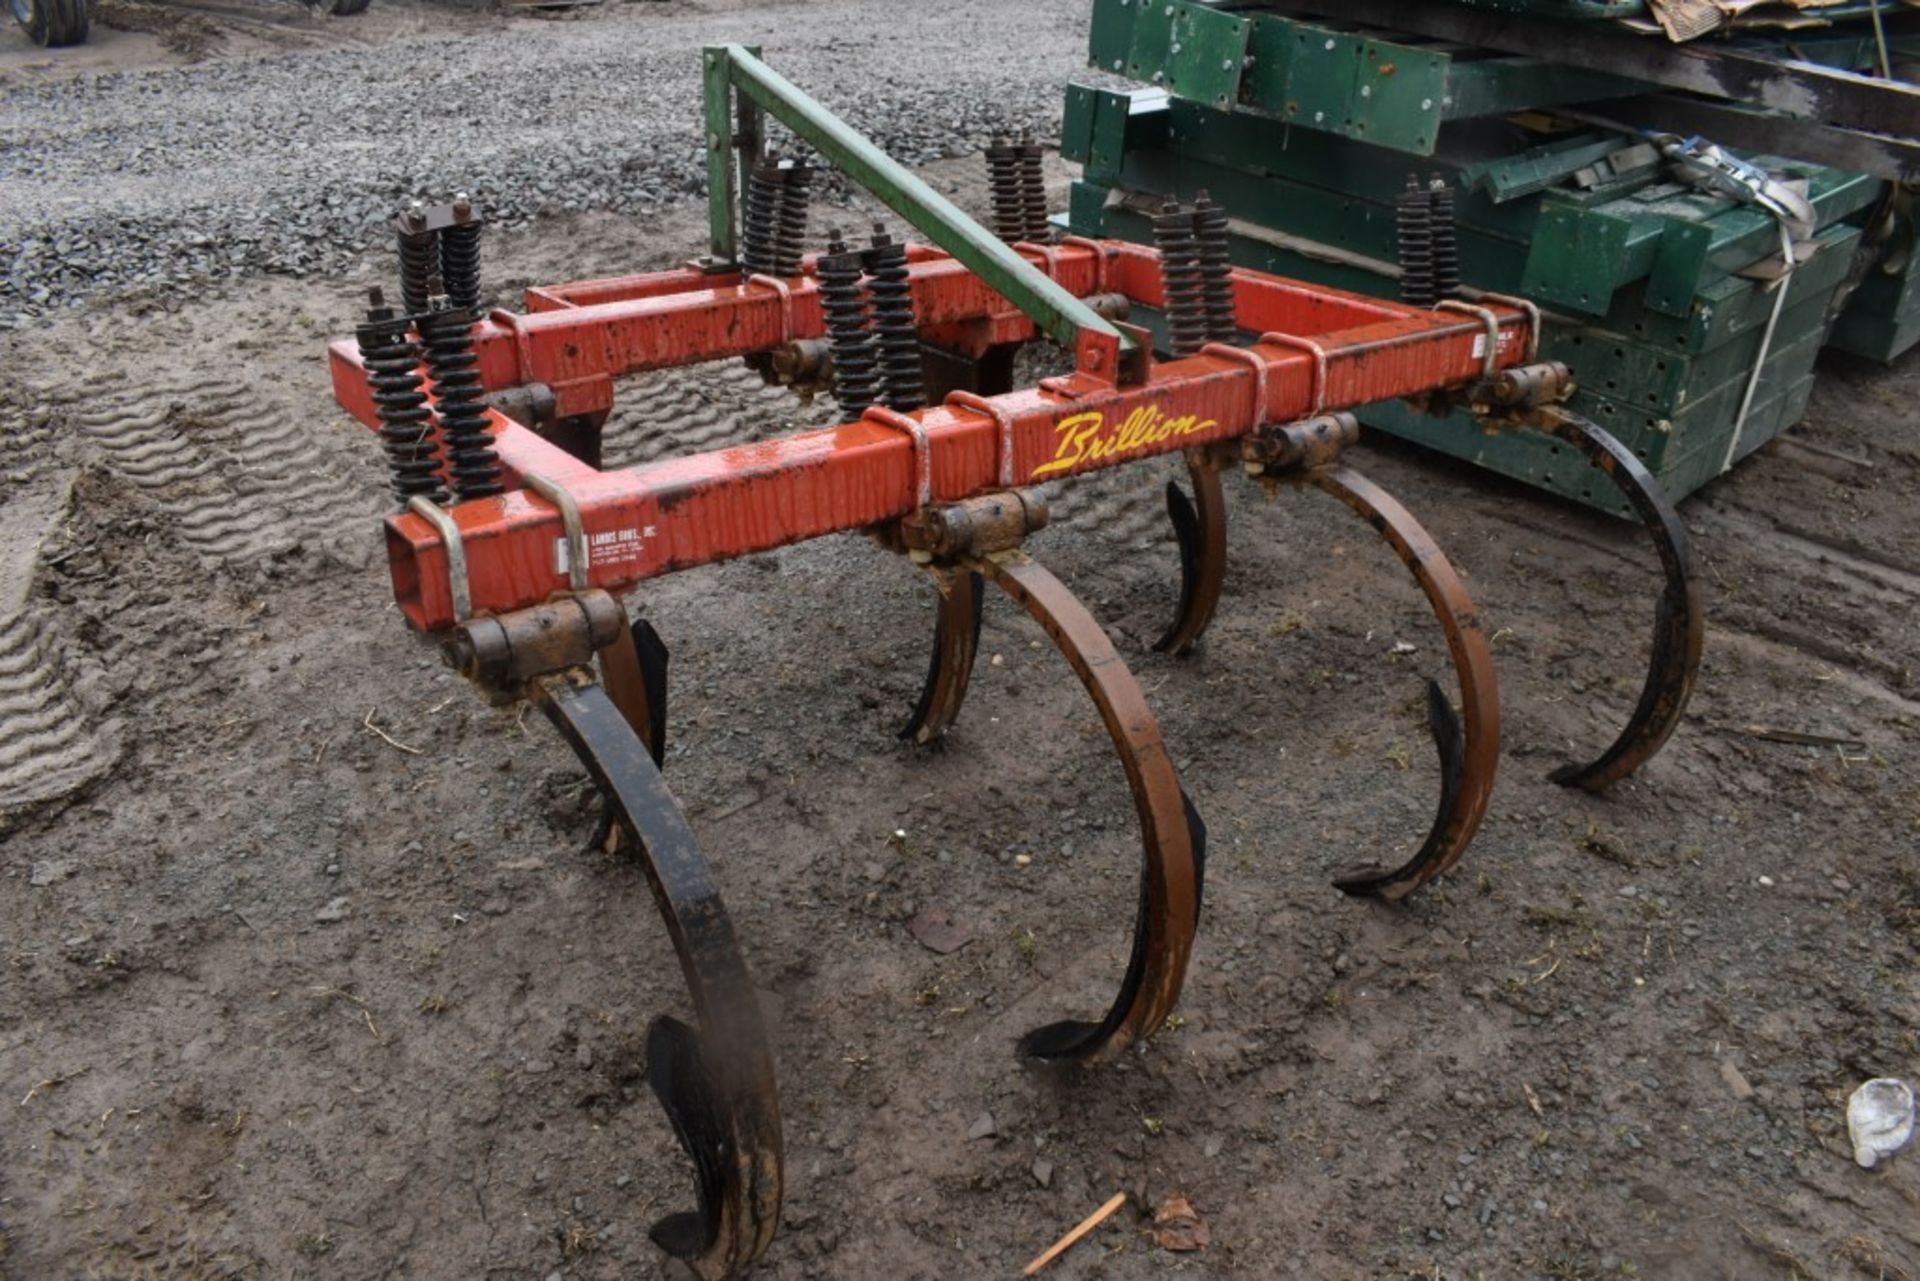 Brillion Cpp-02 7 Shank 3 Point Chisel Plow - Image 8 of 8